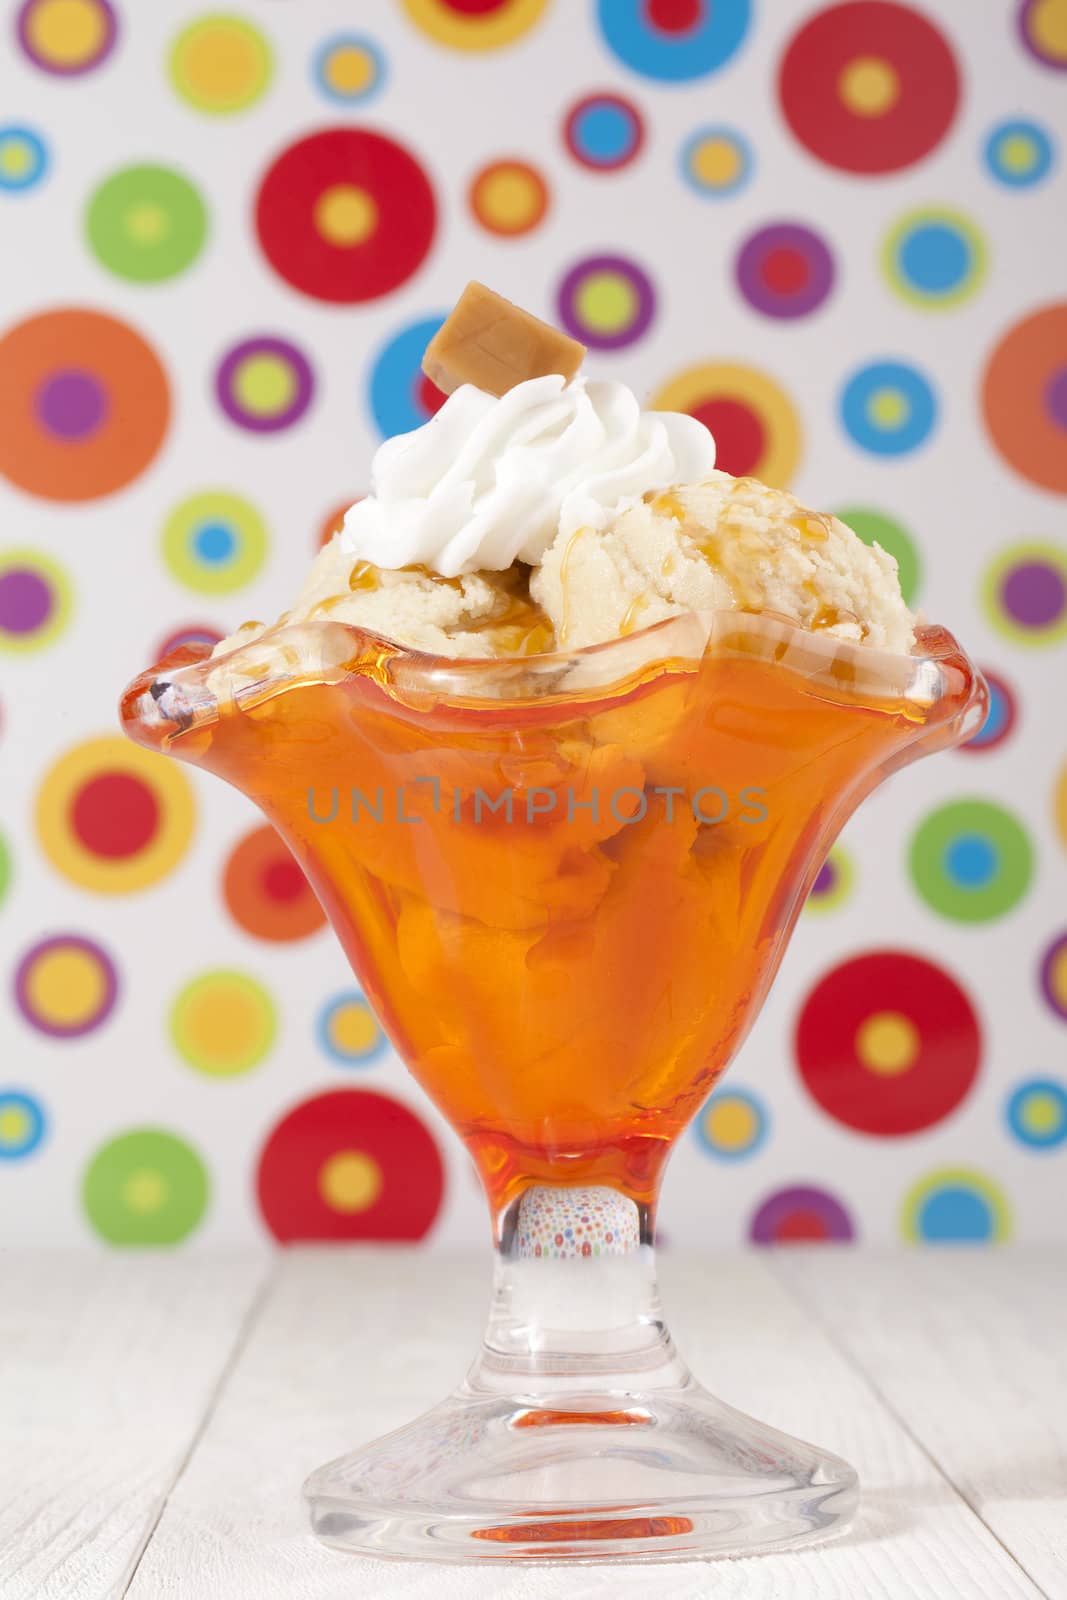 Image of glass of caramel ice cream with abstract background